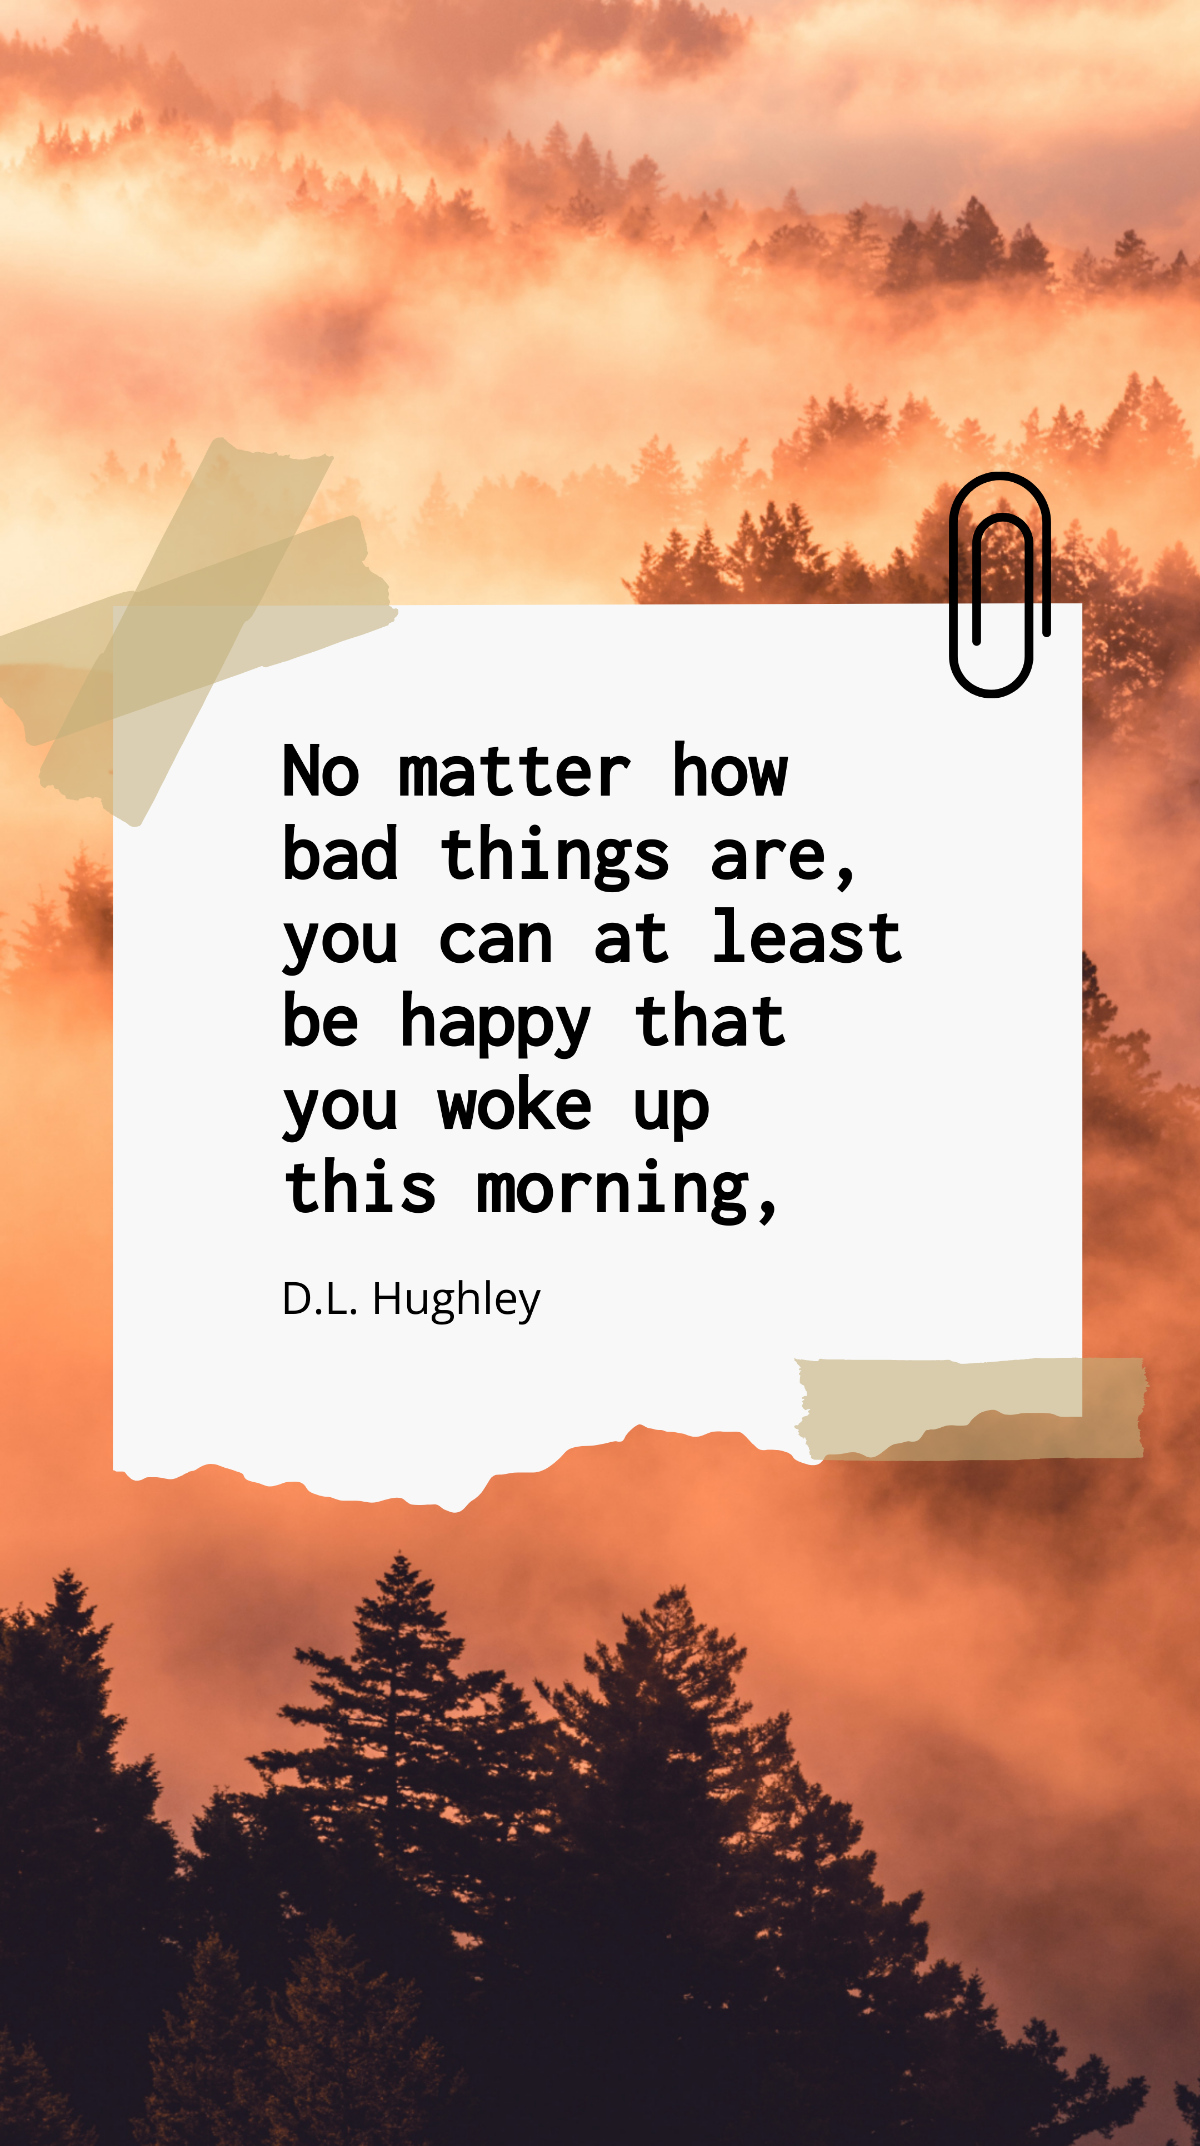 D.L. Hughley - No matter how bad things are, you can at least be happy that you woke up this morning. Template